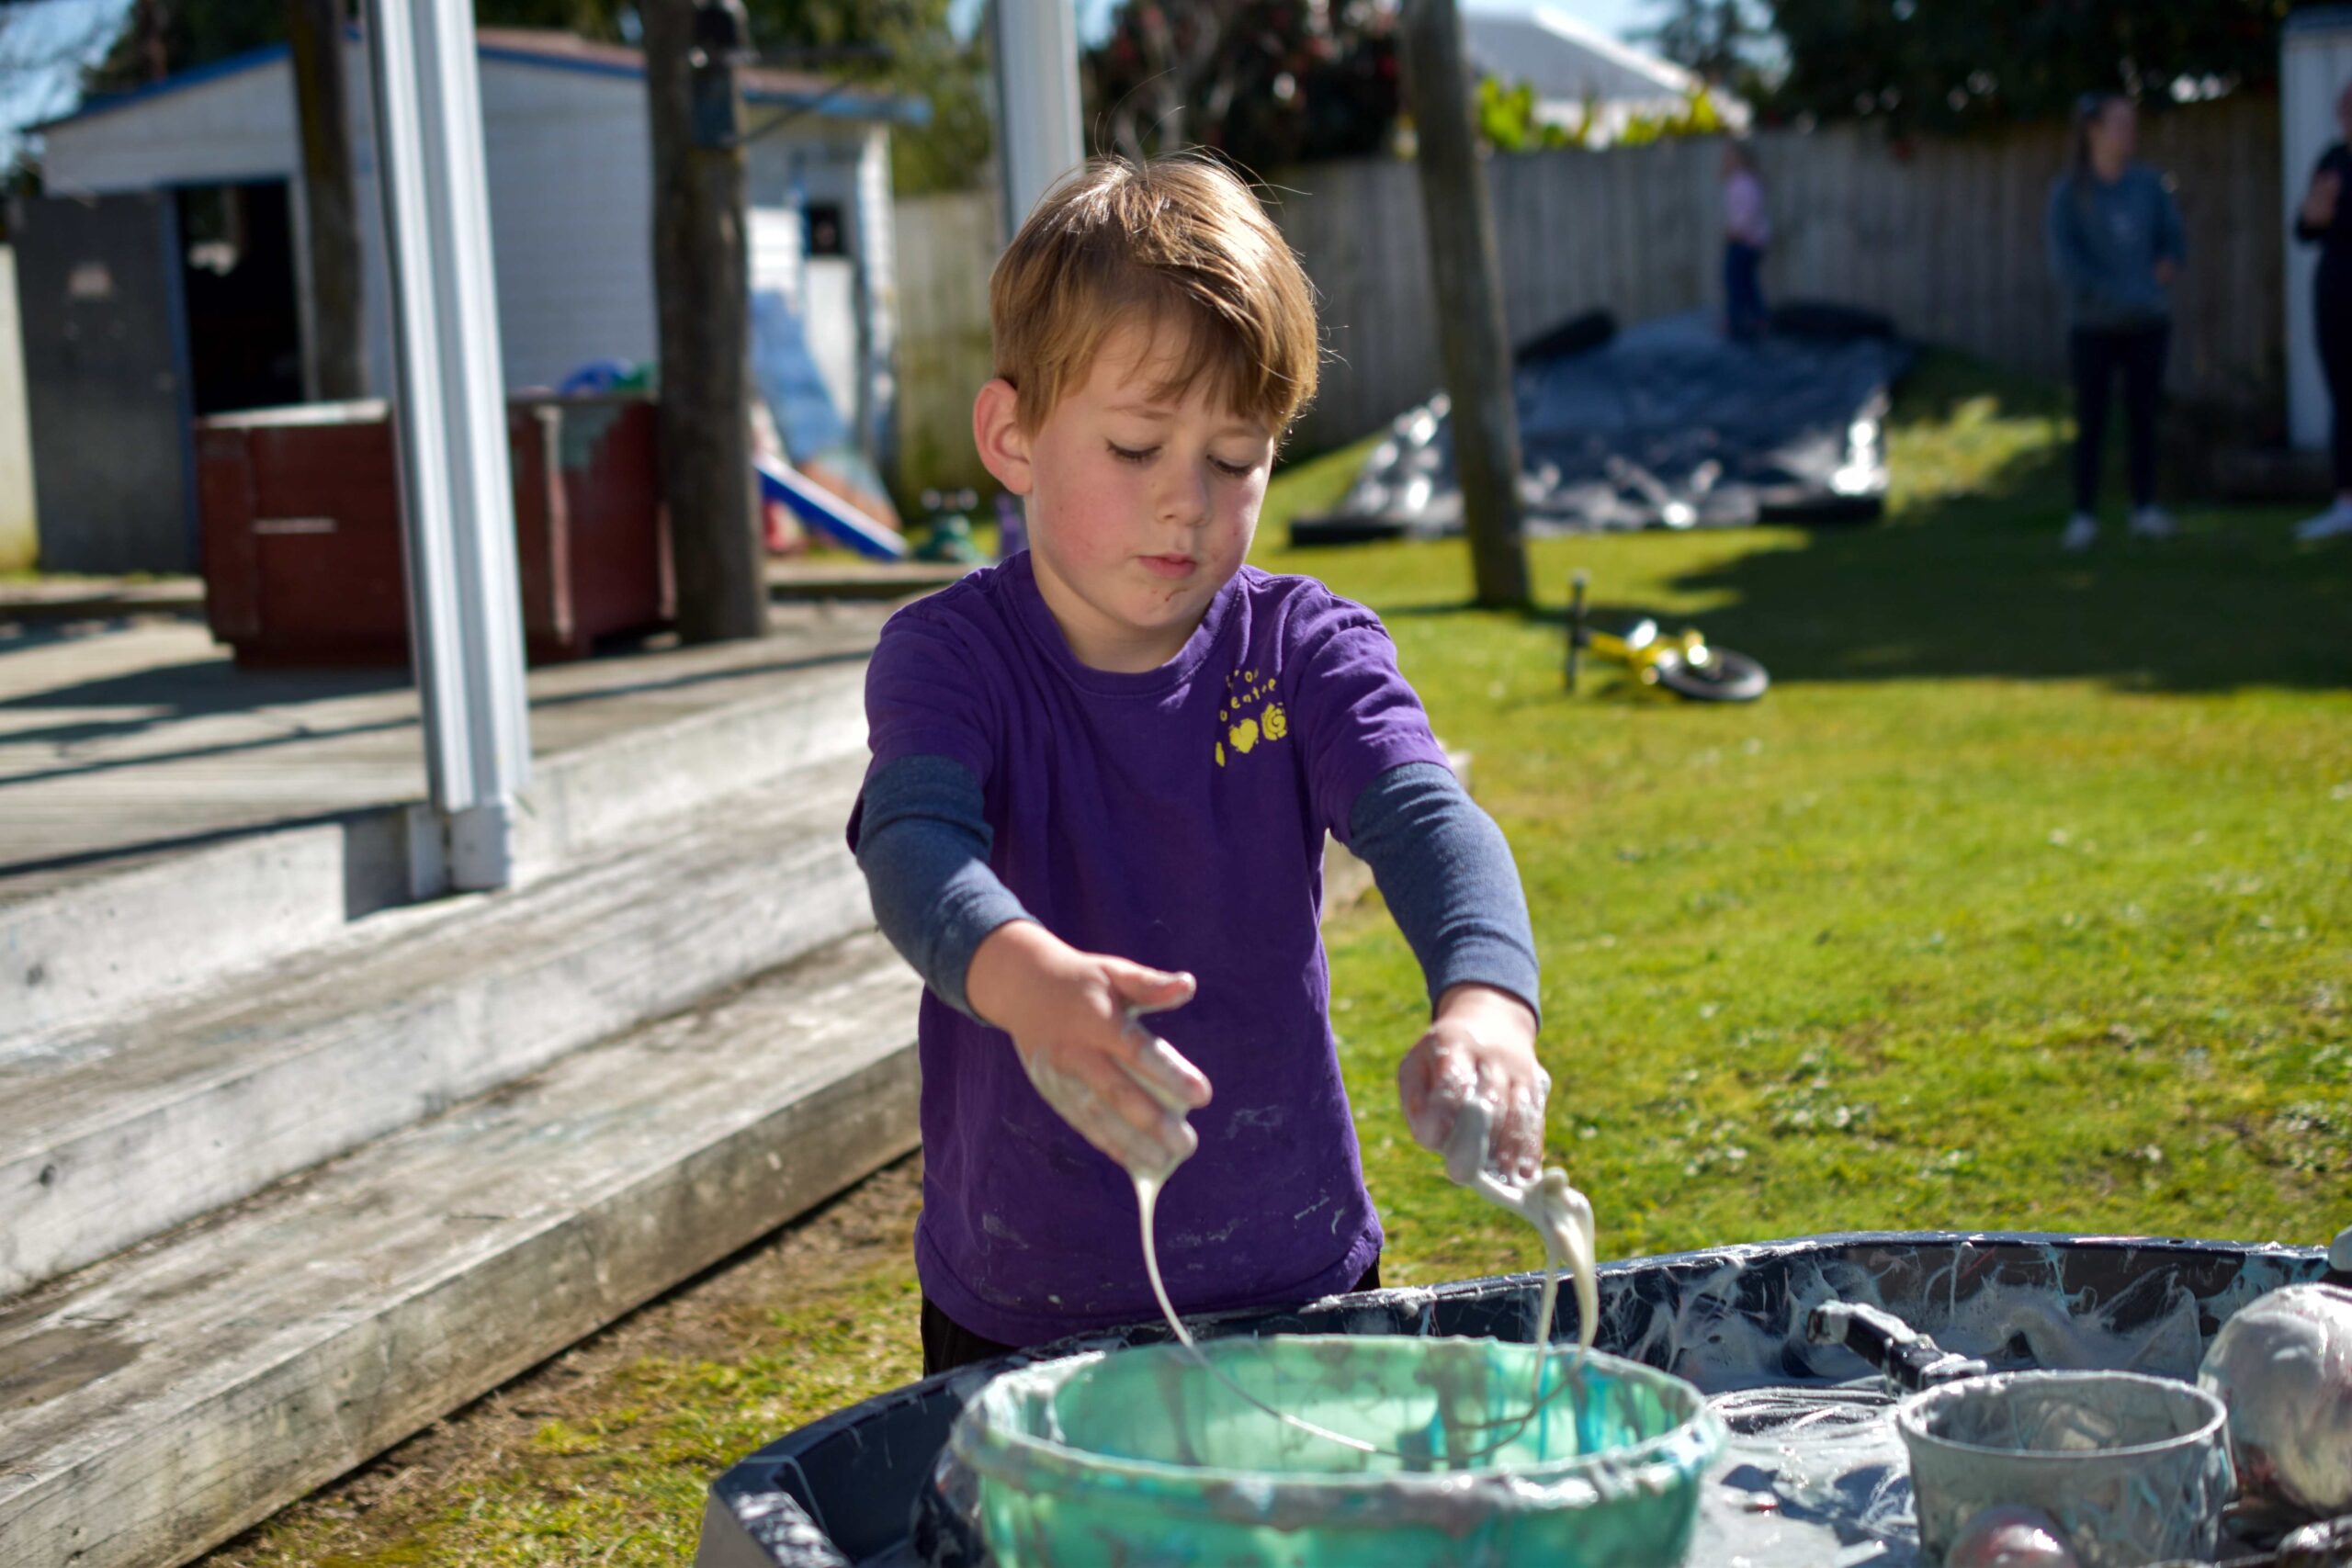 You are currently viewing Messy play fun